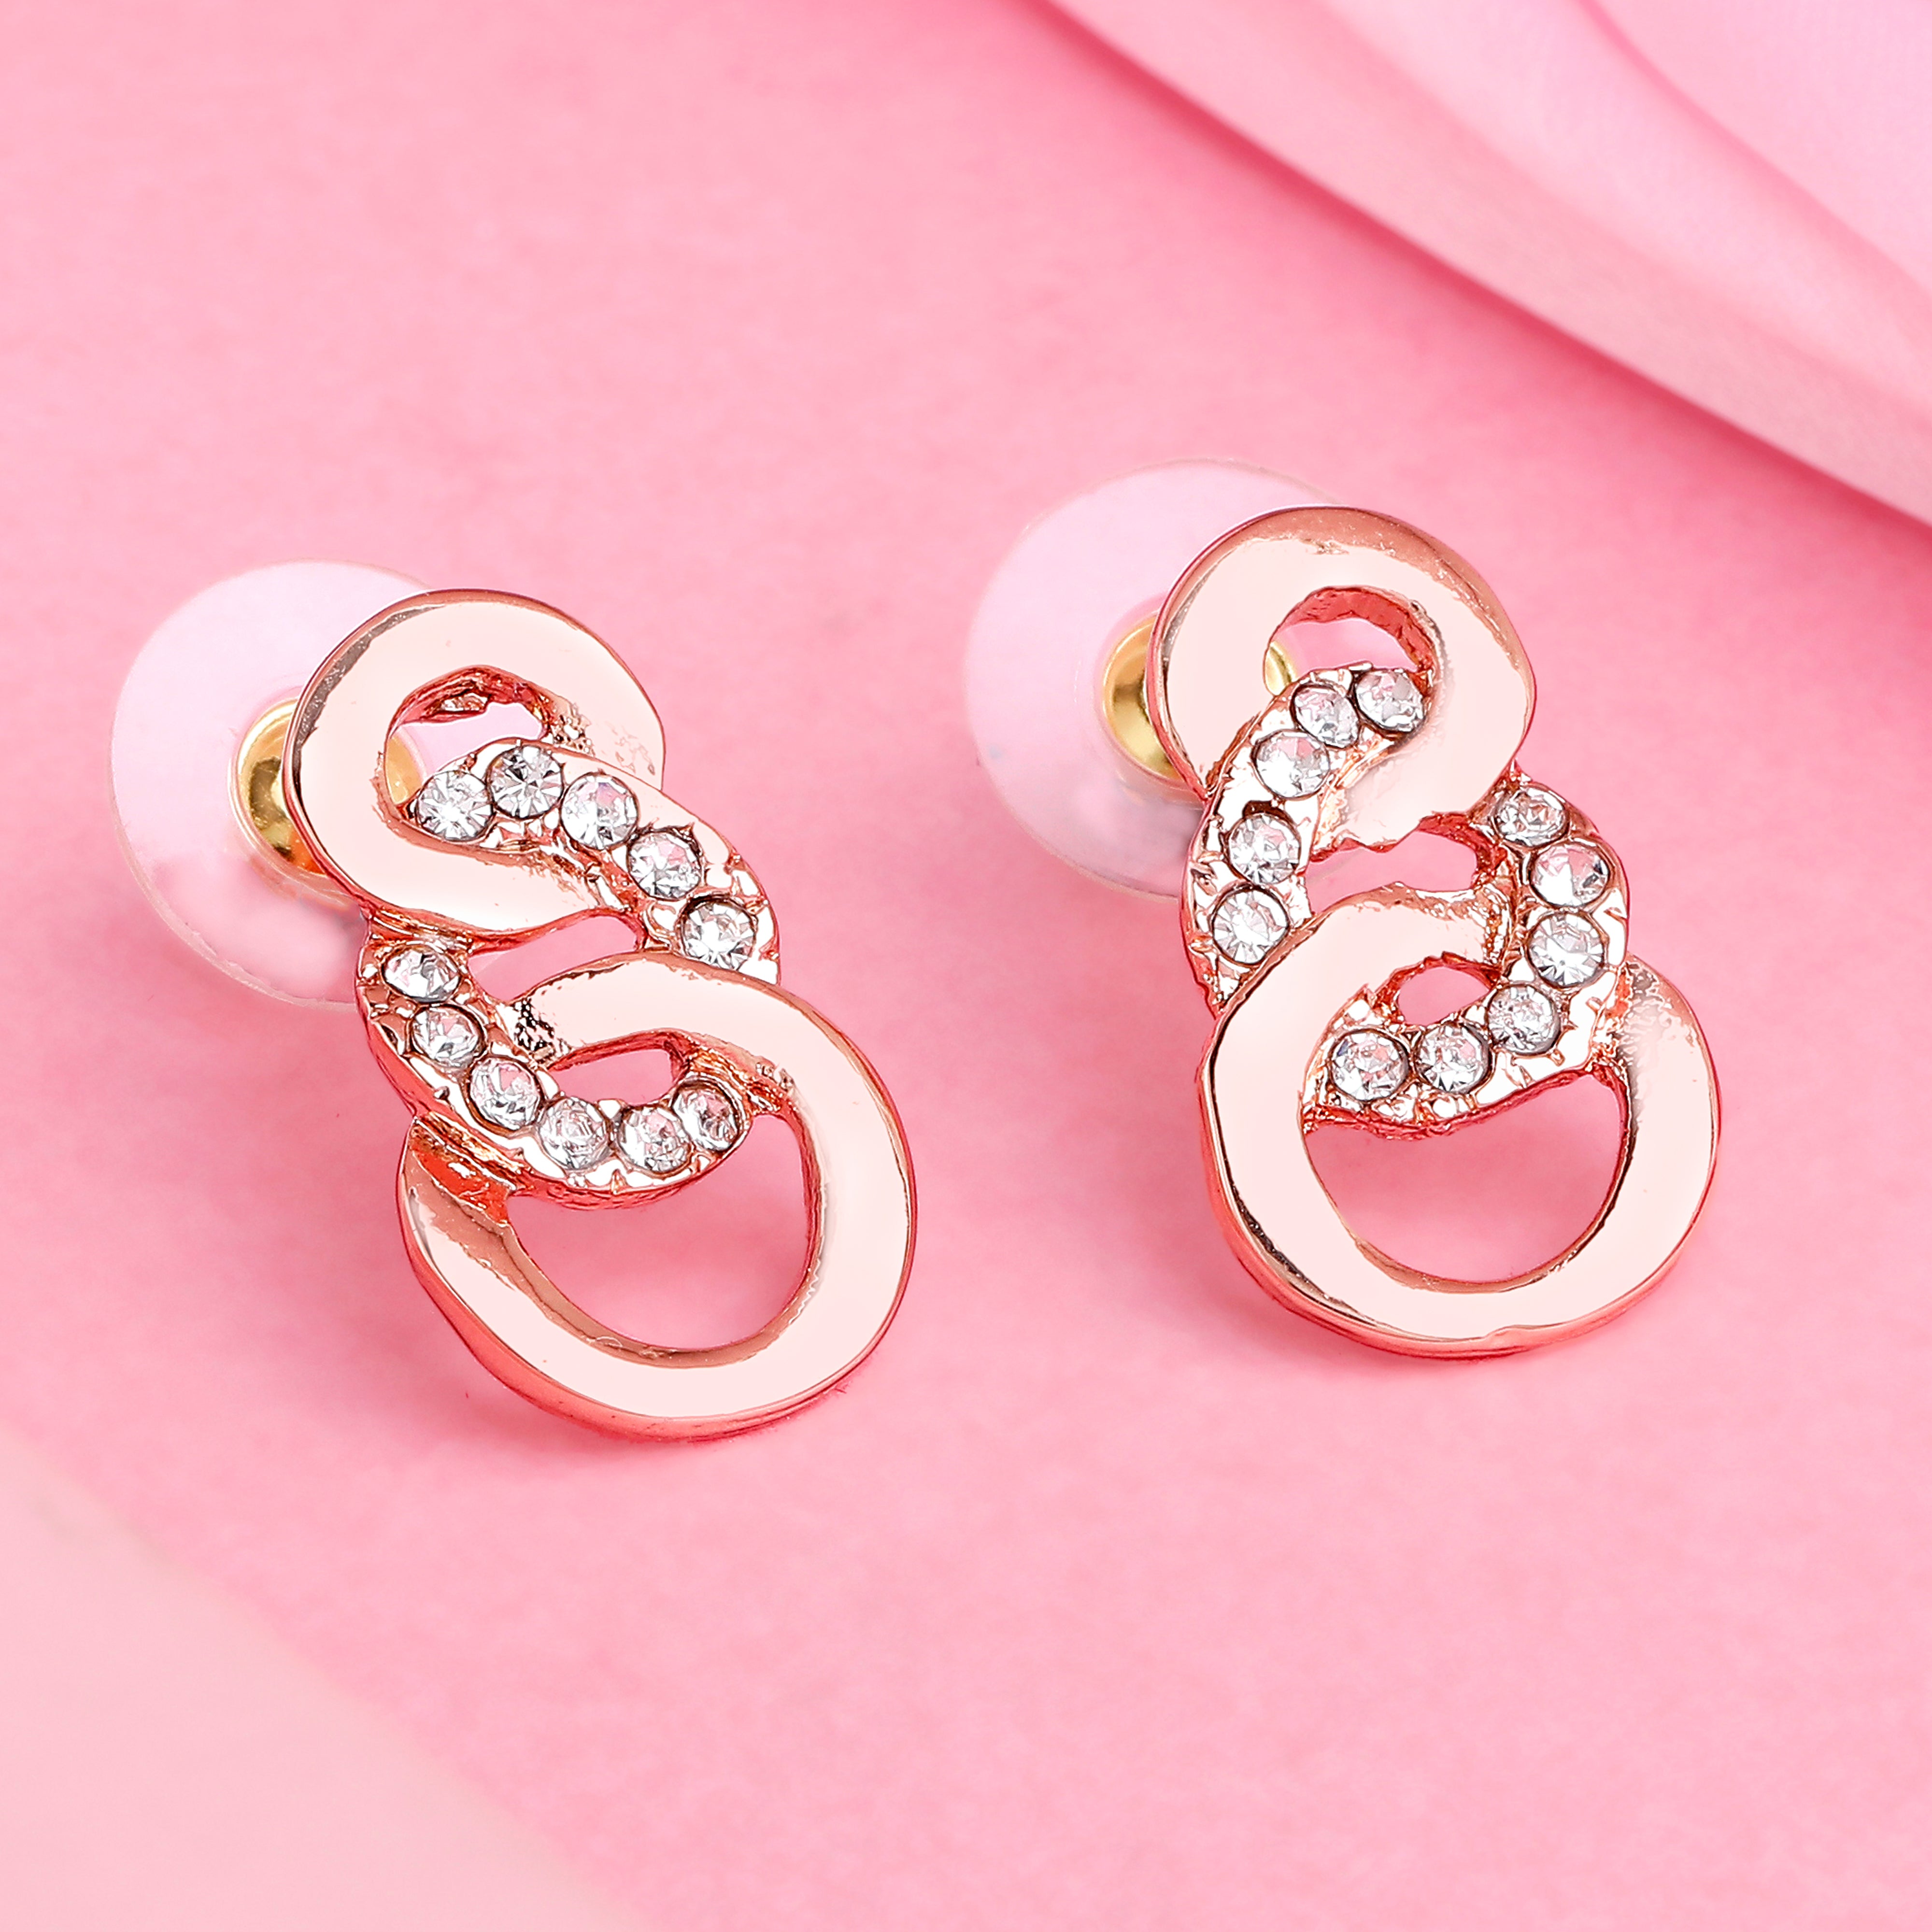 Buy One Gram Gold Light Weight Multi Colour Stone Cute Small Gold Earrings  for Baby Girl